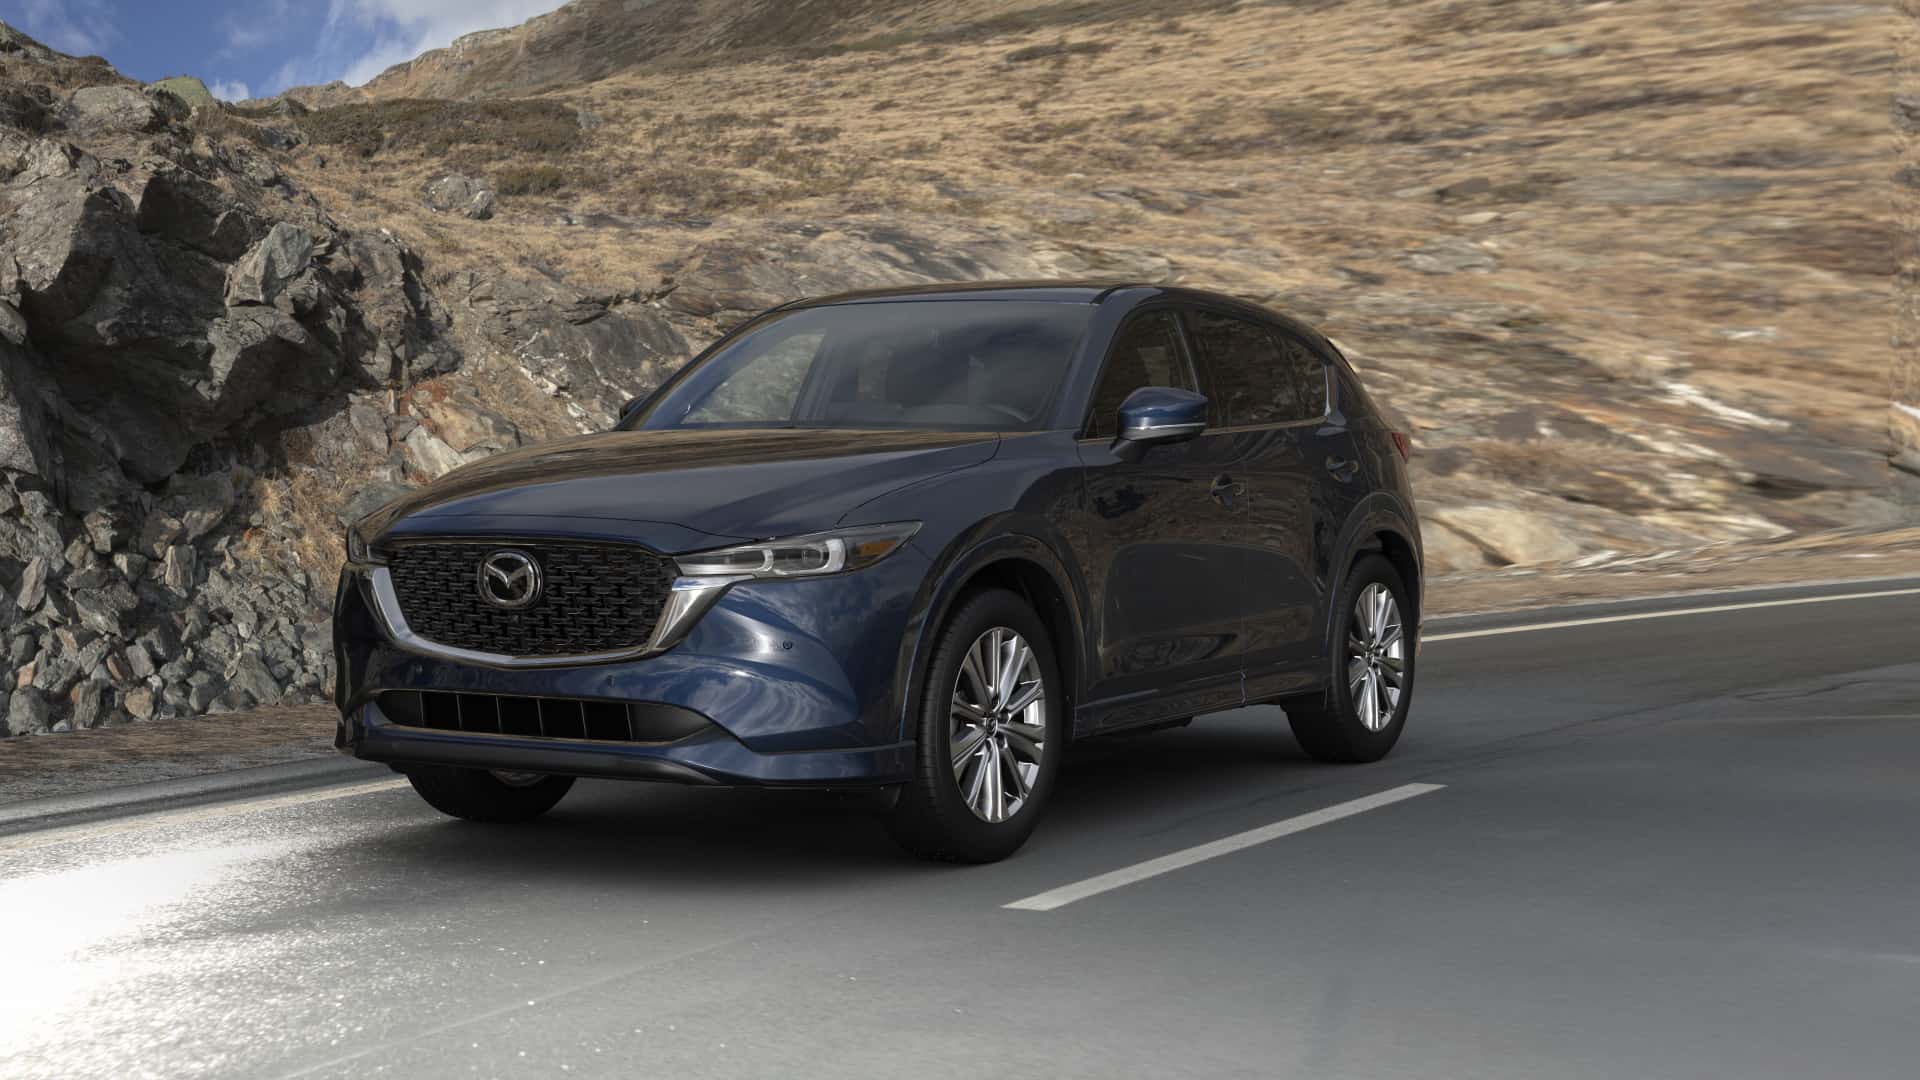 2023 Mazda CX-5 2.5 Turbo Signature Deep Crystal Blue Mica| Bommarito Mazda St. Peters in St. Peters MO